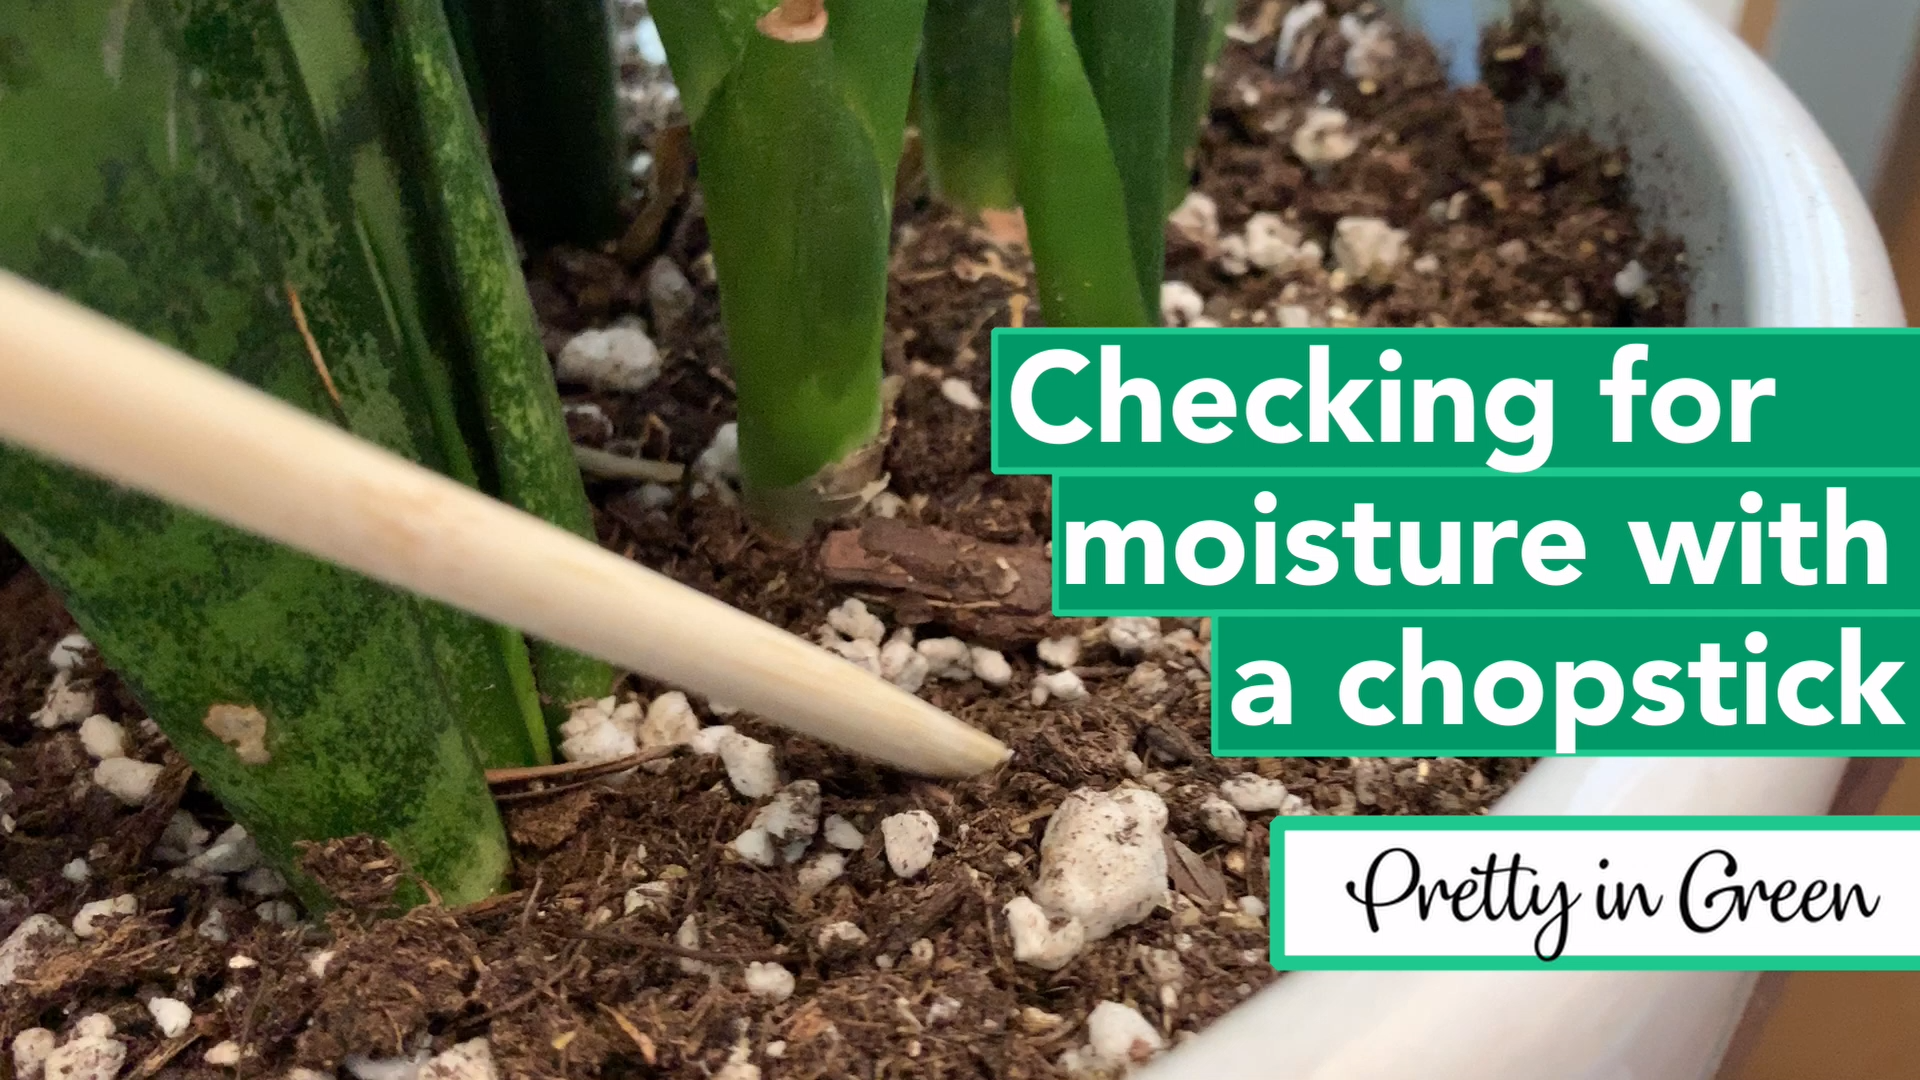 Checking Moisture with Chopsticks -   16 planting Indoor flowers ideas